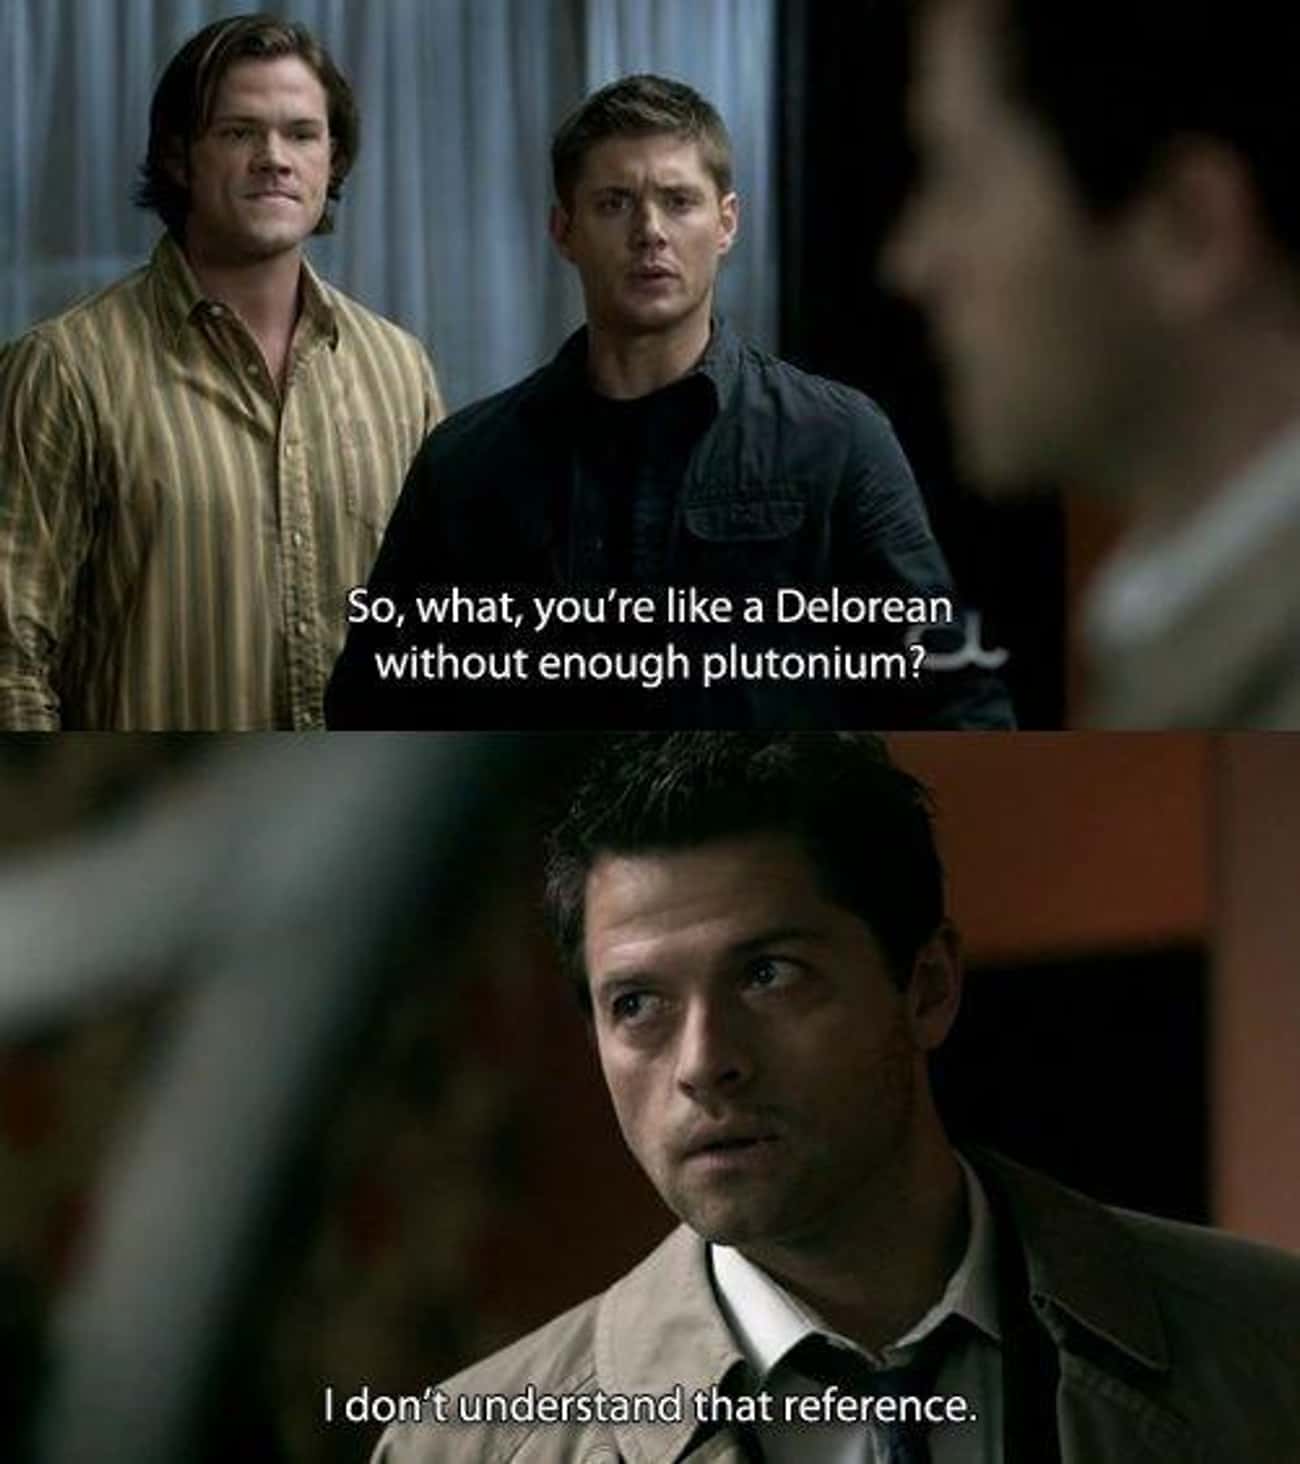 Castiel Isn't As Savvy As Sam And Dean About 'Back to the Future' 